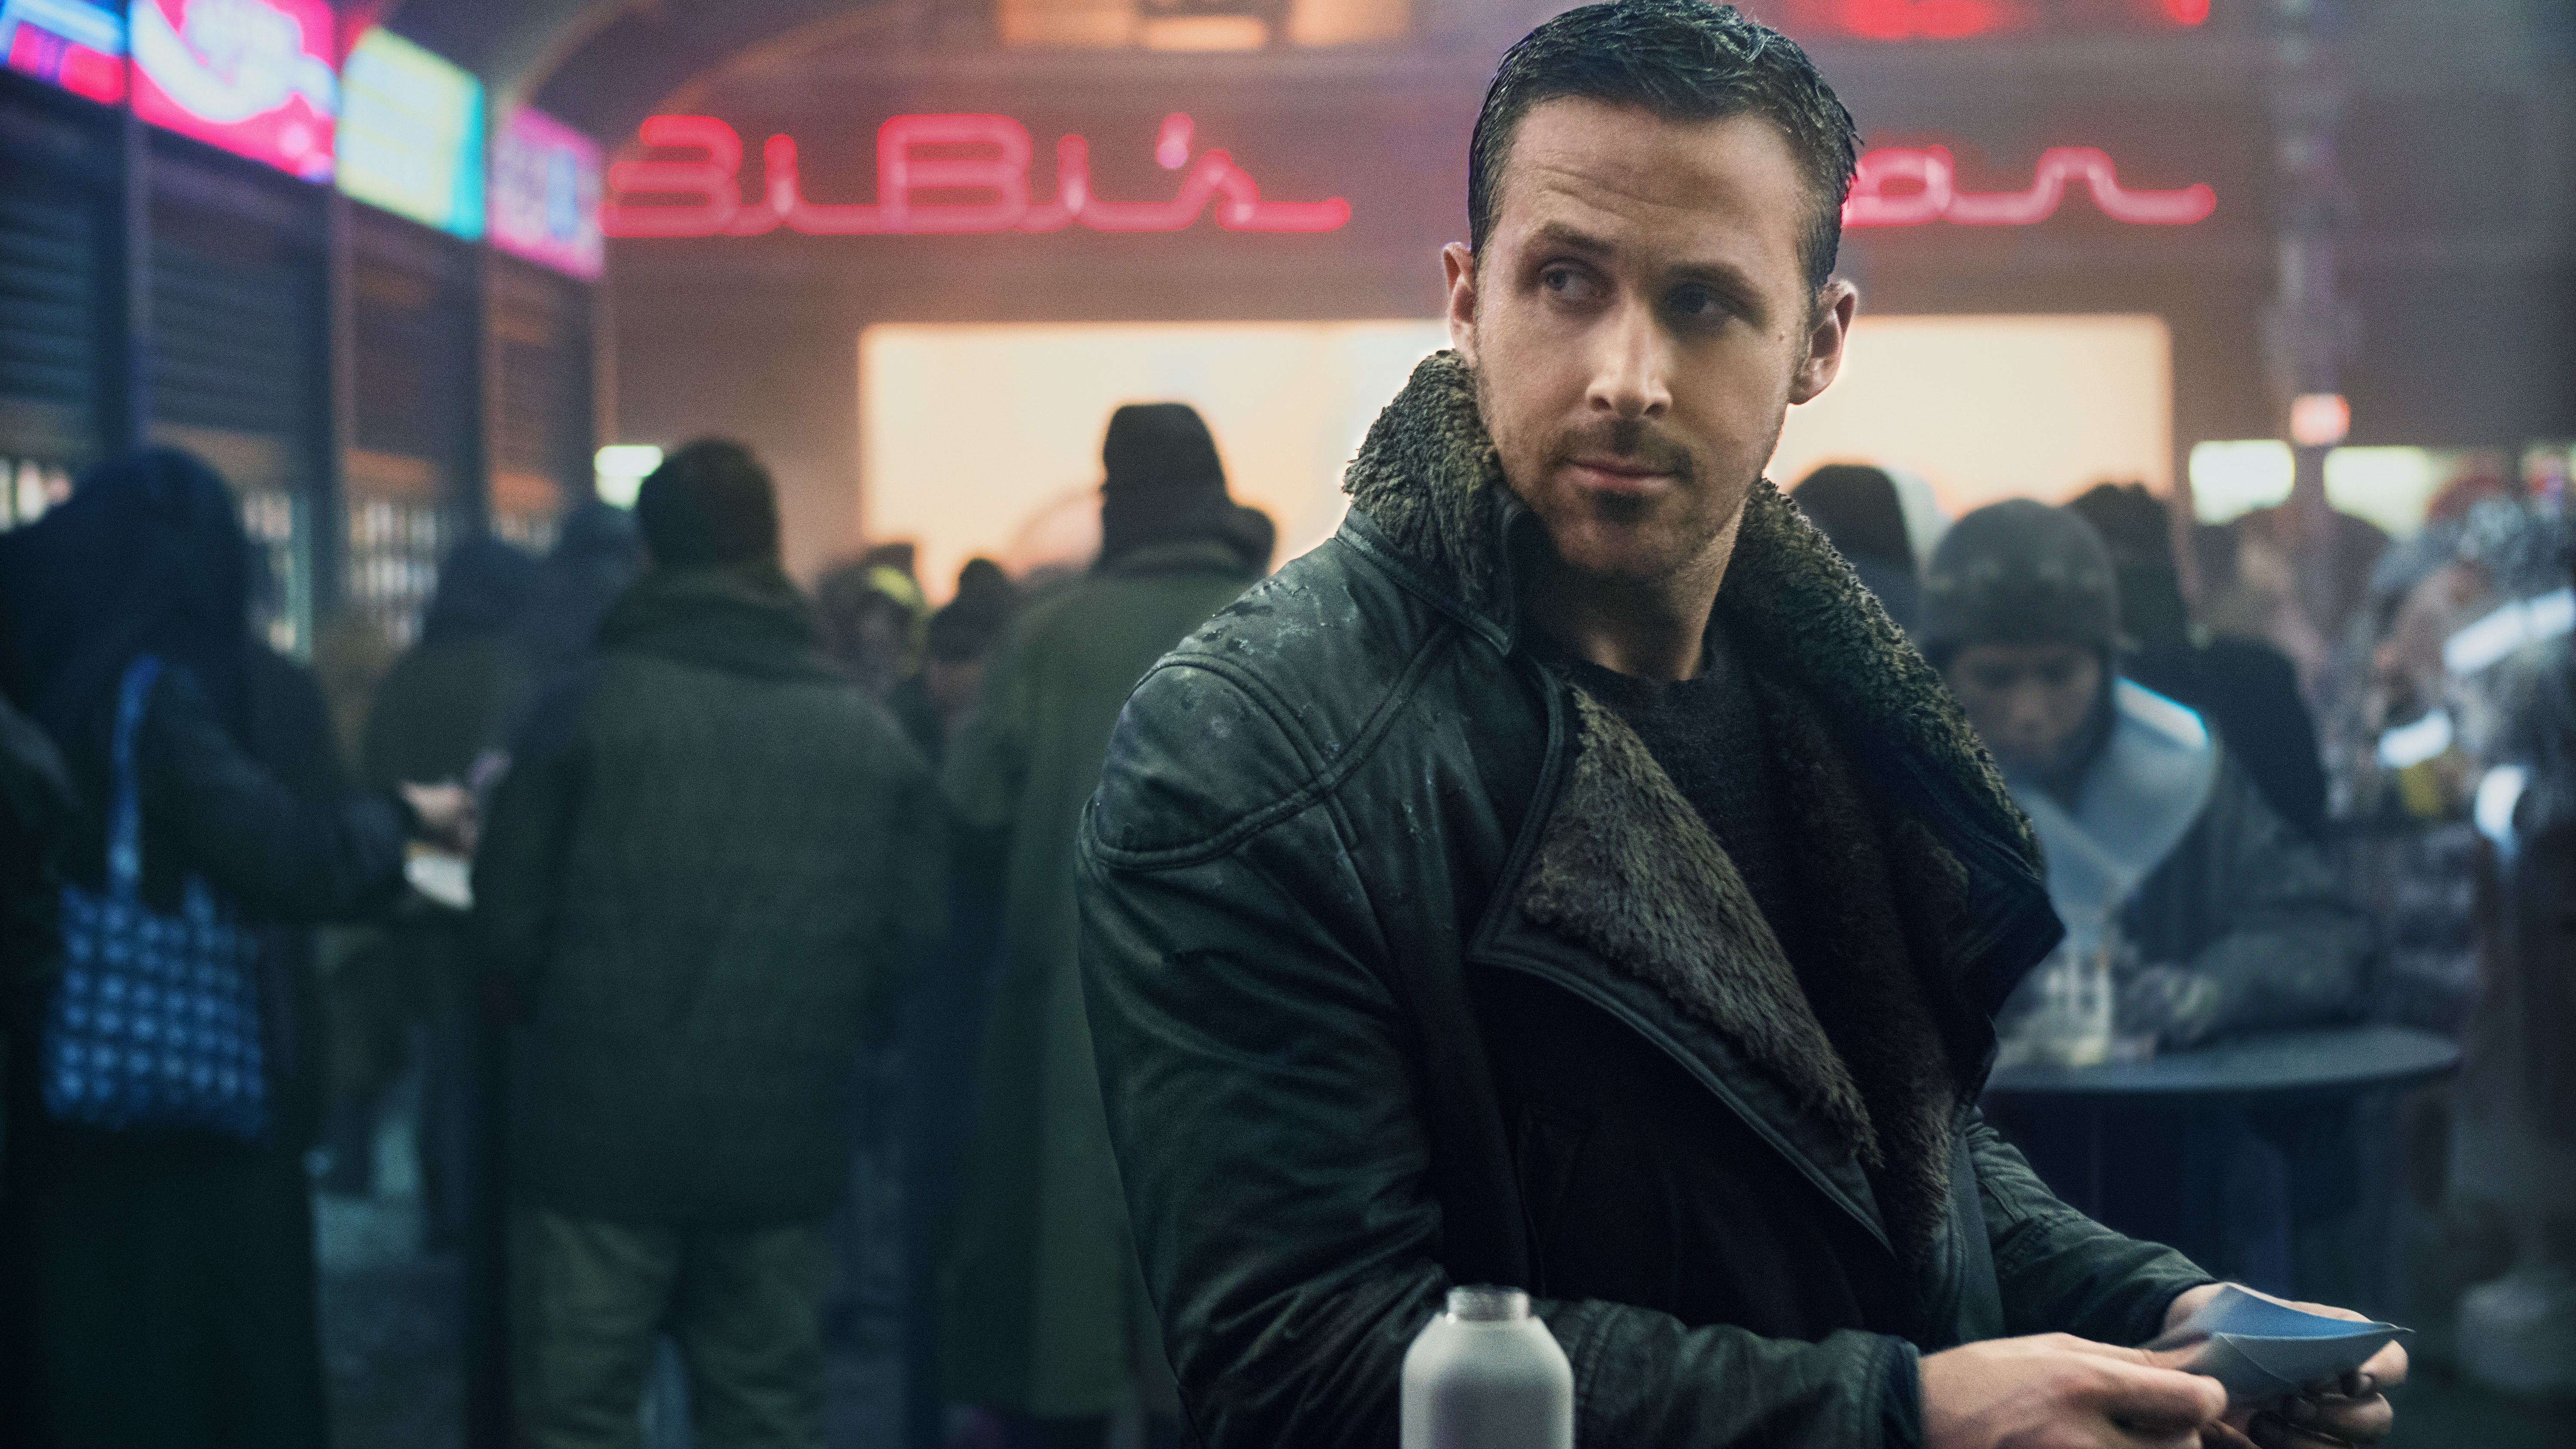 Ryan Gosling plays a replicant assigned to take out replicants in Blade Runner 2049.